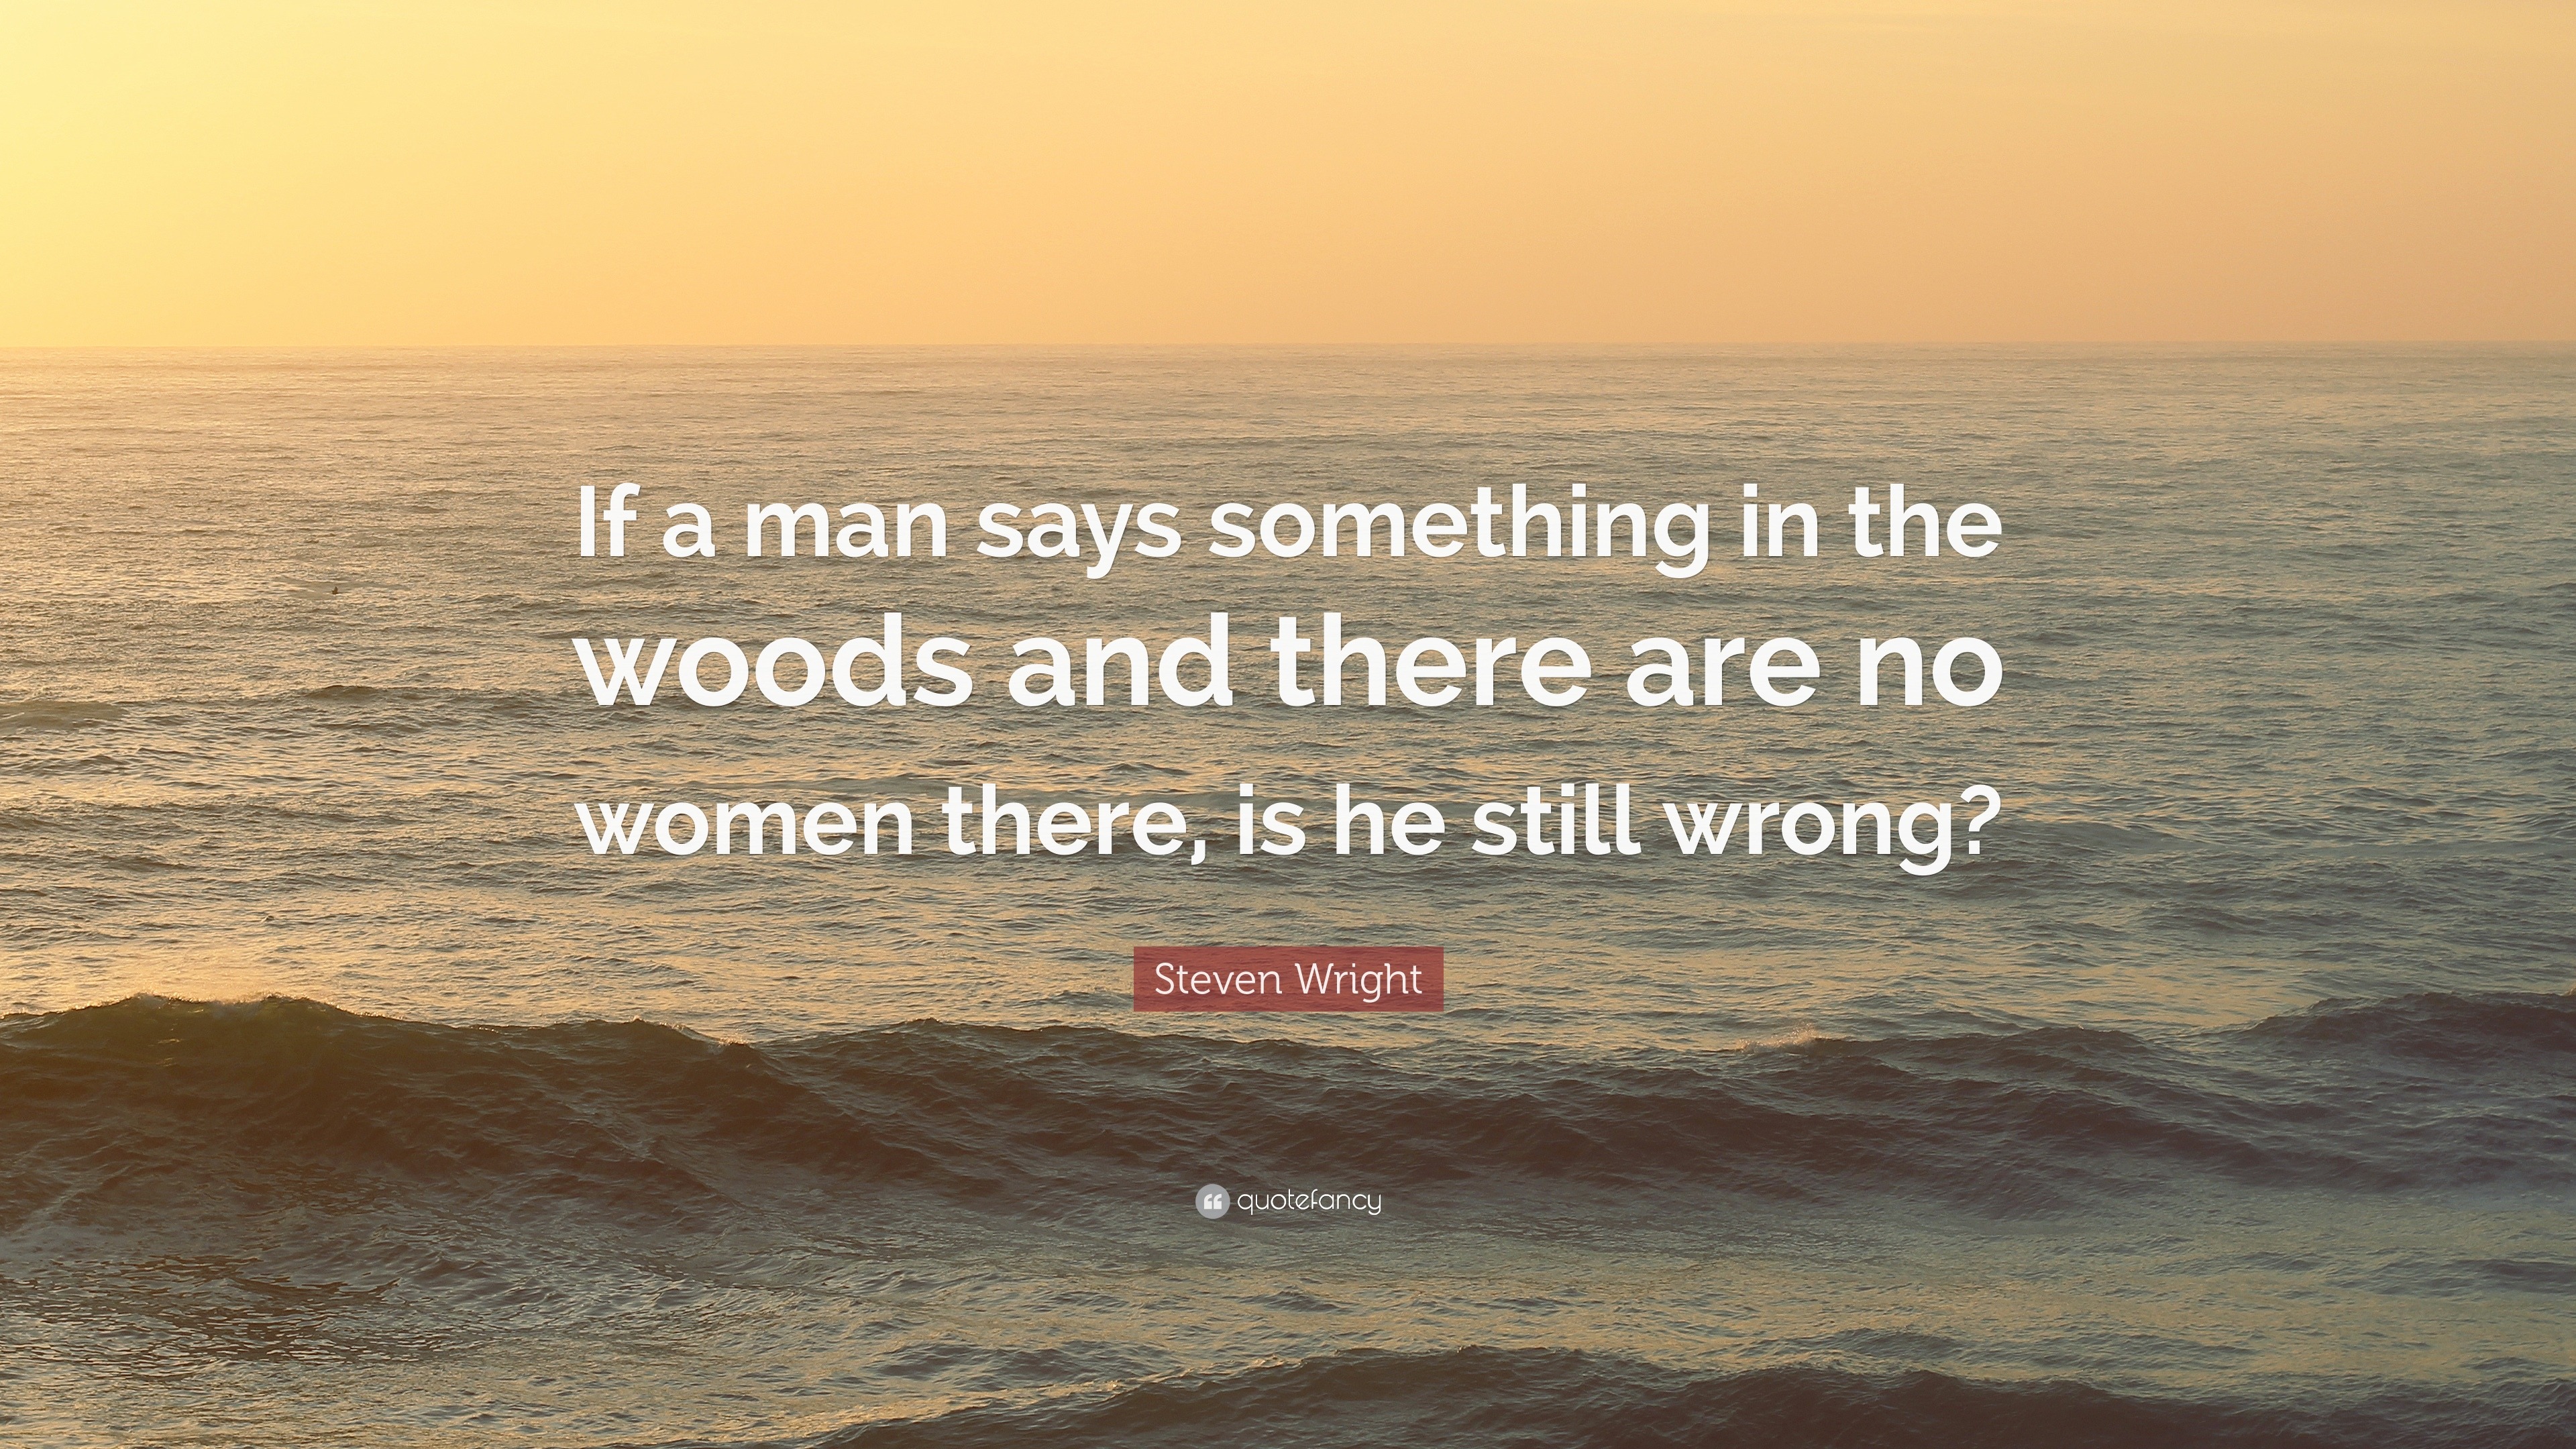 Steven Wright Quote: “If a man says something in the woods and there